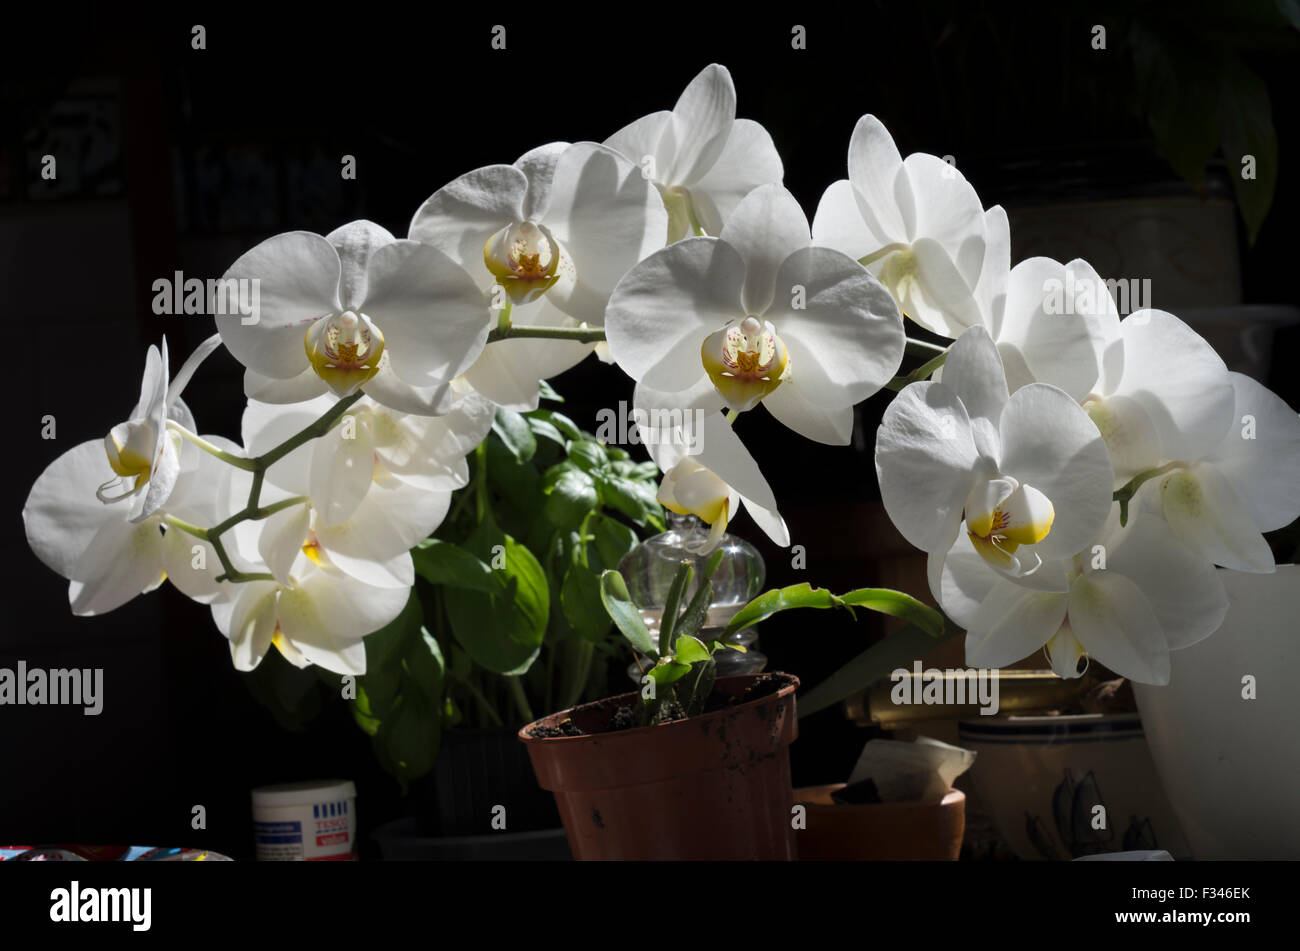 Sun streaming through a row of white orchid flowers in a brown plastic pot against a dark black background, Stock Photo